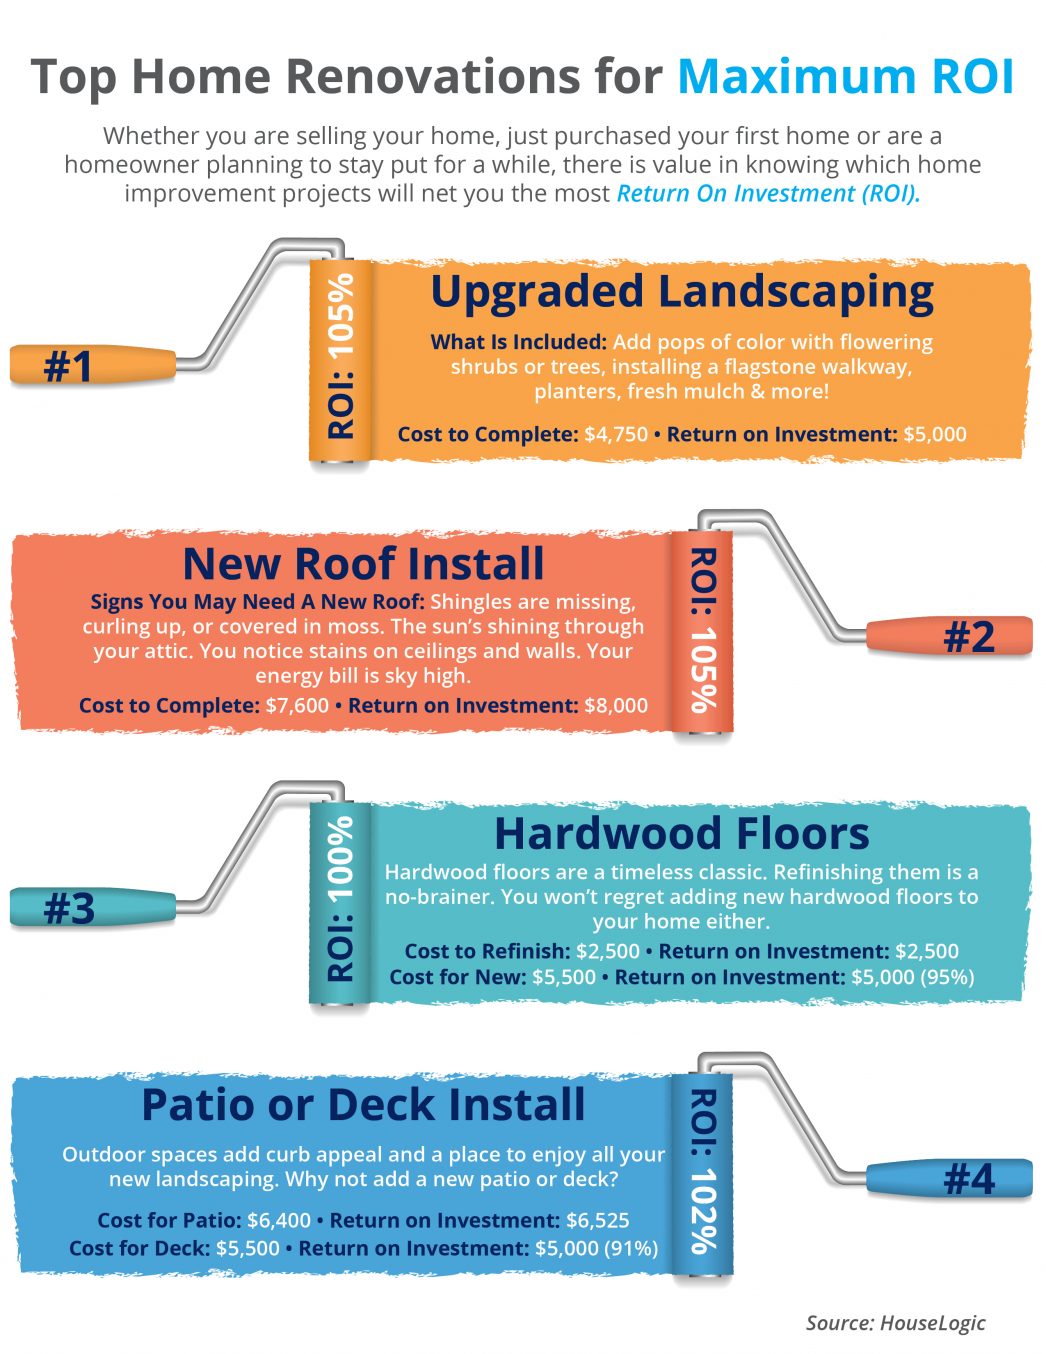 Top 4 Home Renovations for Maximum ROI [INFOGRAPHIC] | MyKCM